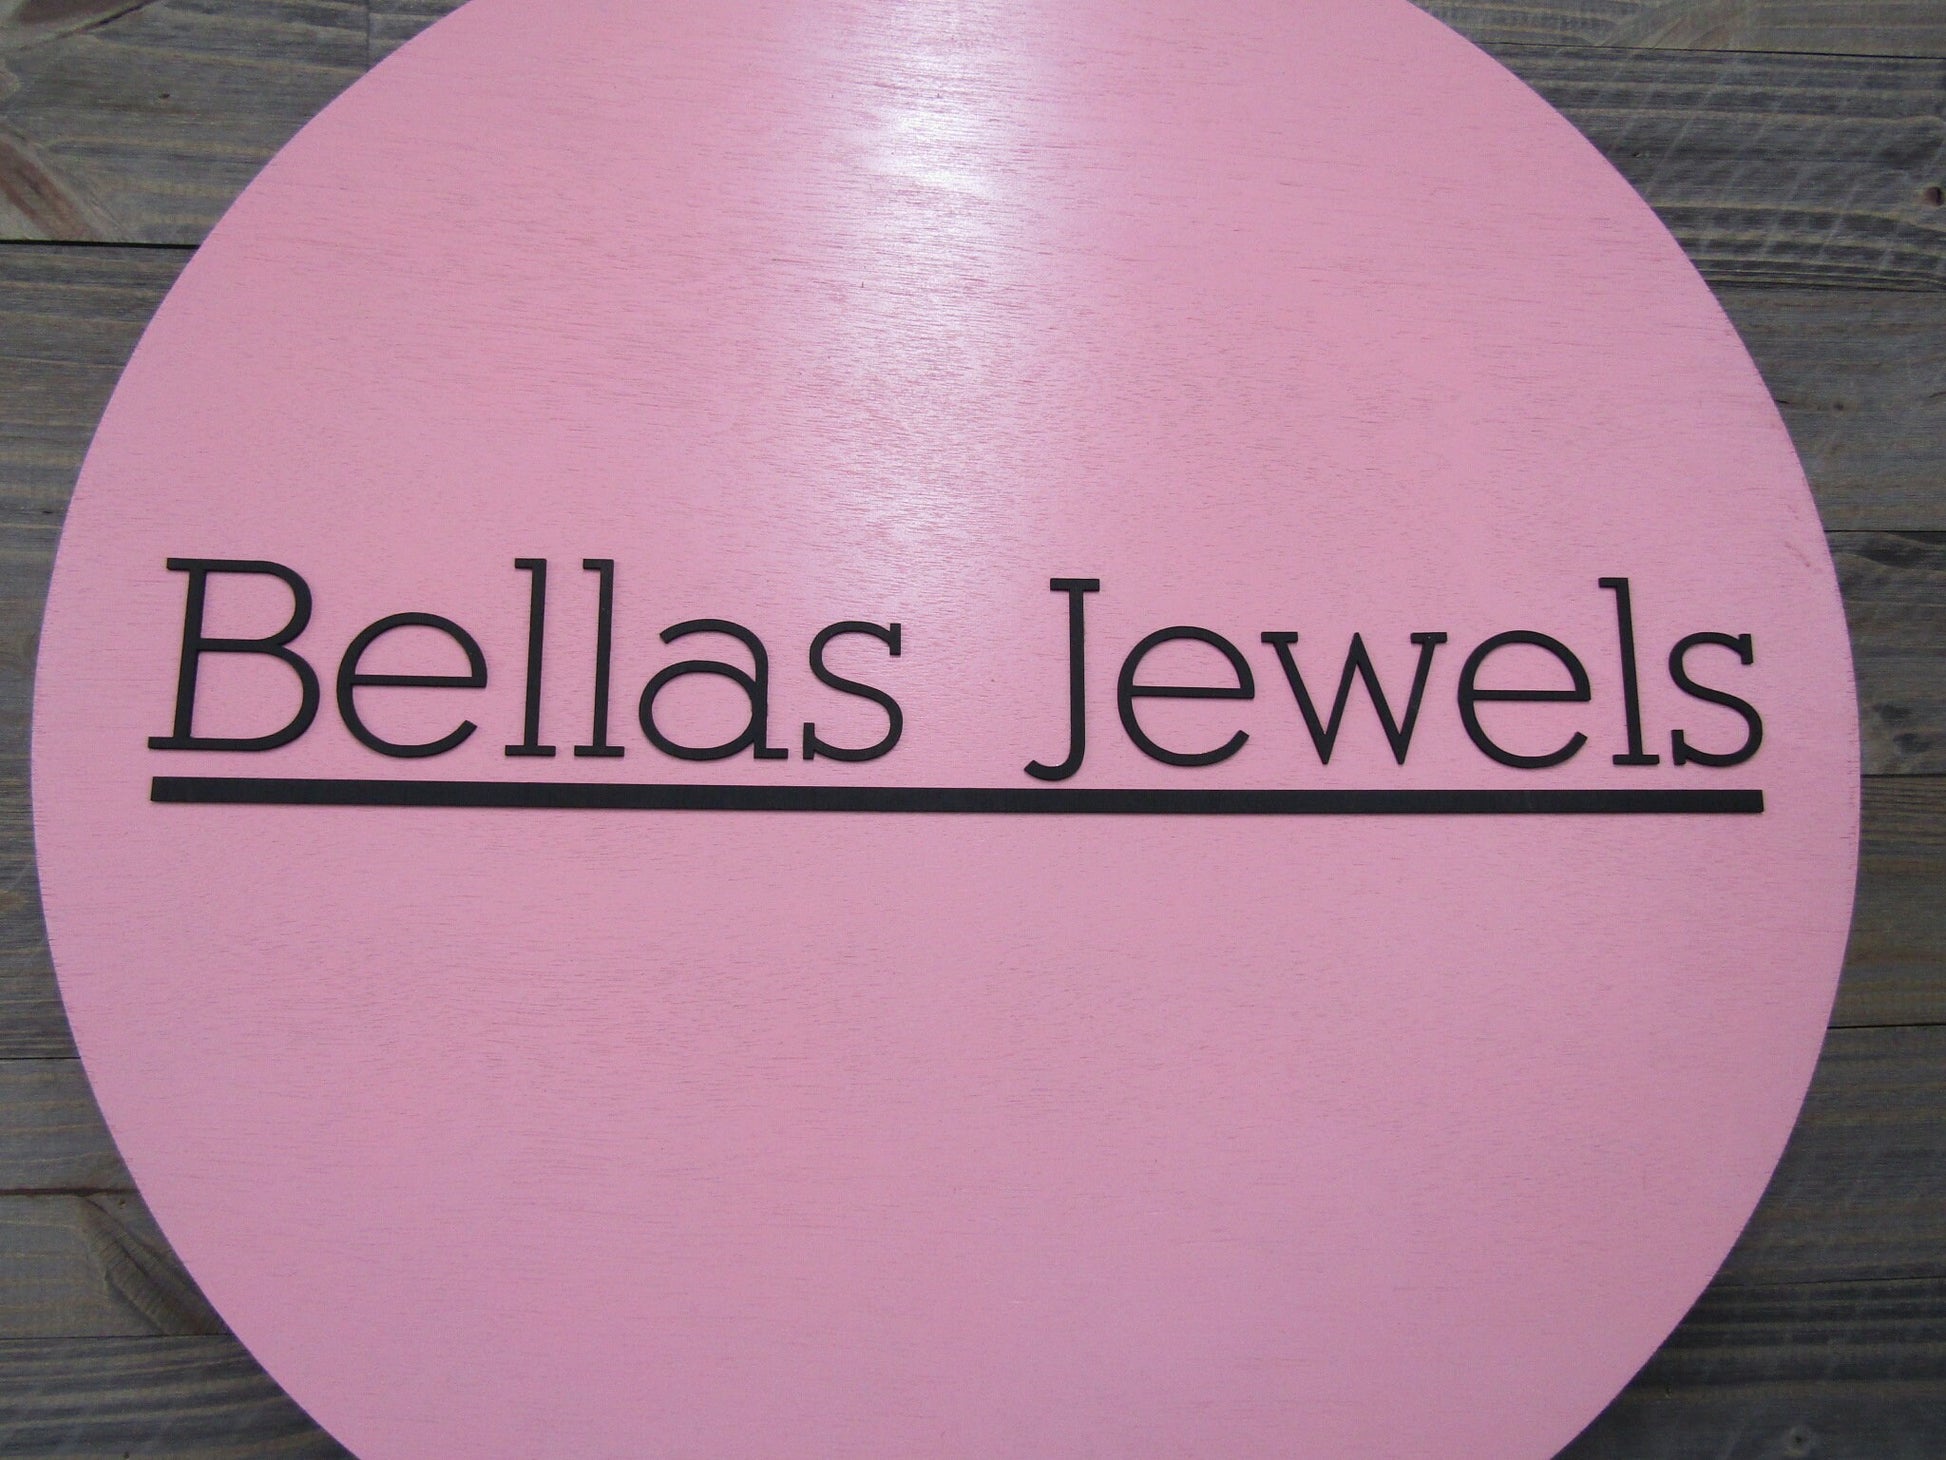 Custom Sign Round Business Commerical Signage Minimalist Made to Order Bellas Jewels Store Front Small Shop Jewelry Circle Wooden Handmade